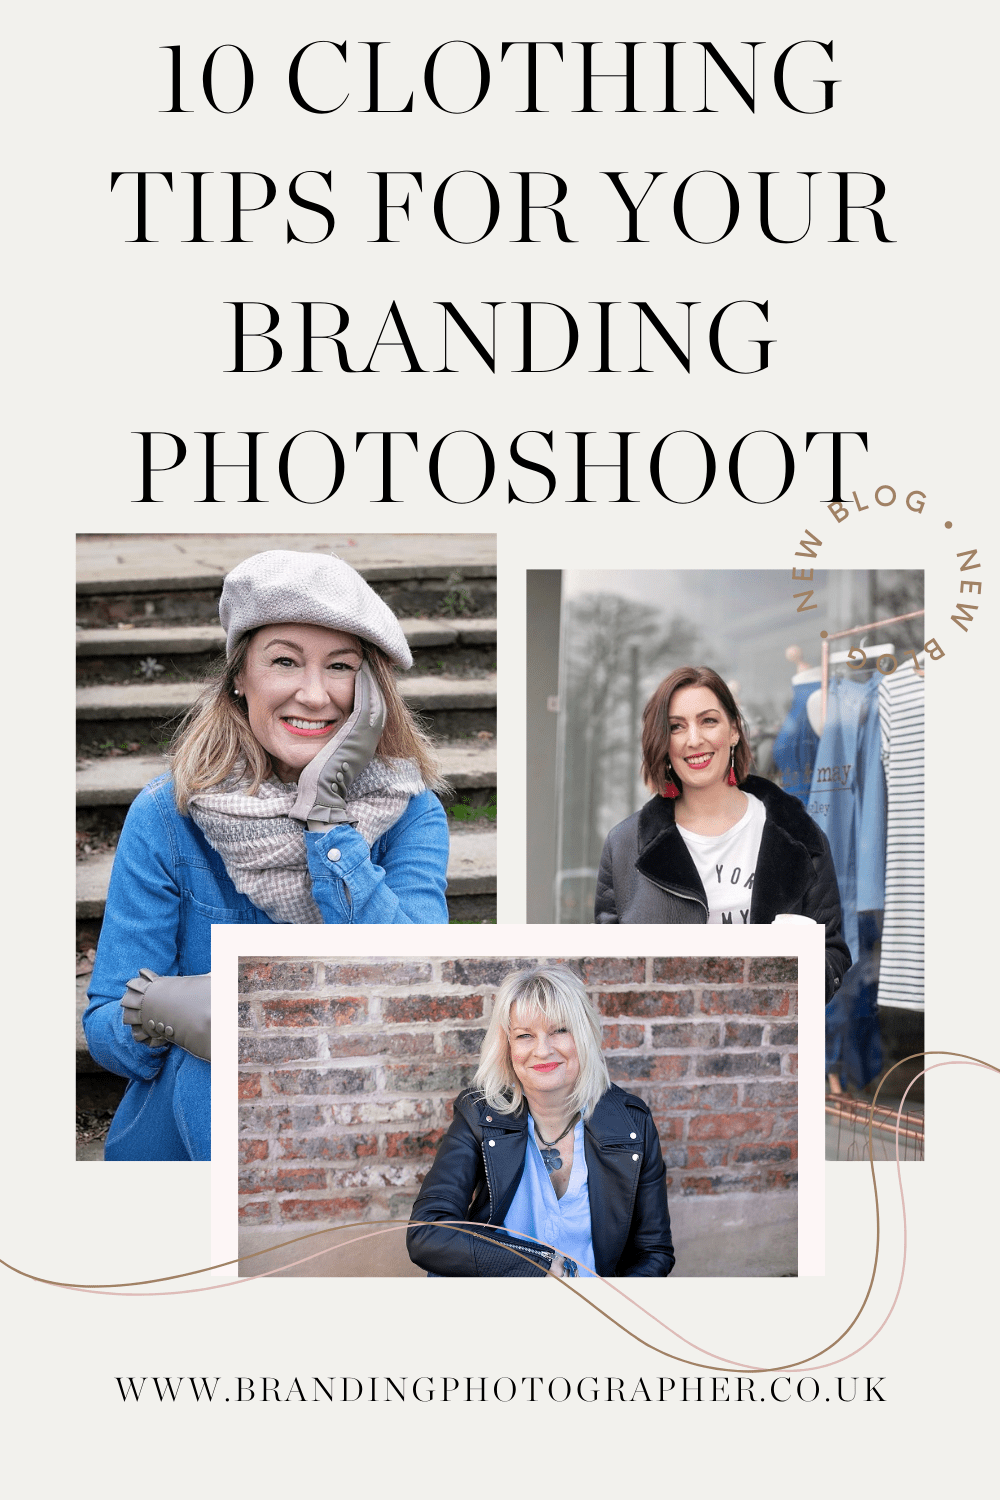 10 clothing tips for your branding photoshoot